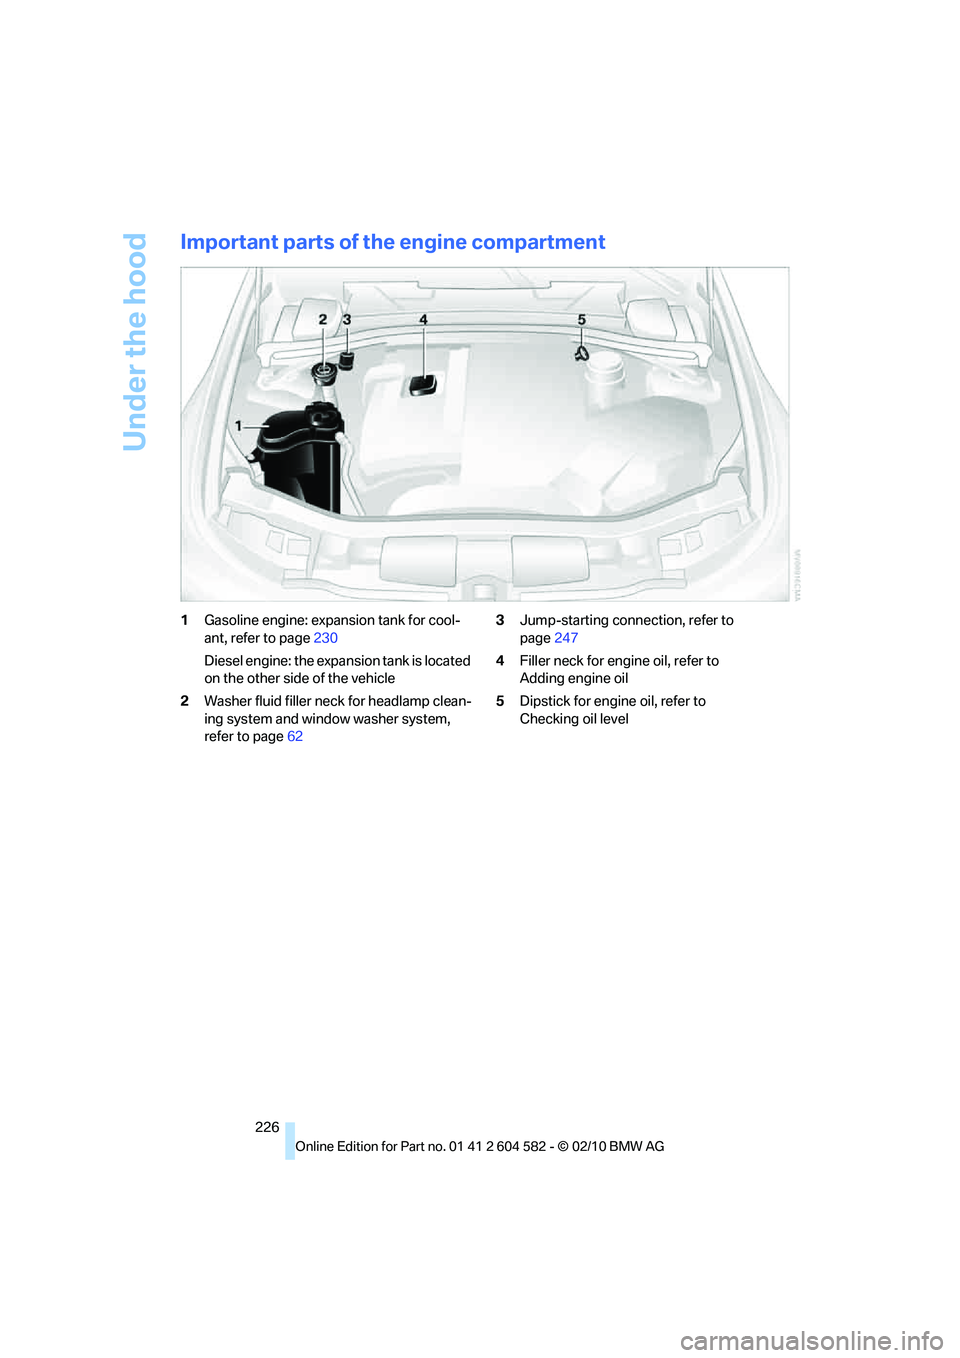 BMW 335I XDRIVE SEDAN 2011  Owners Manual Under the hood
226
Important parts of the engine compartment
1Gasoline engine: expansion tank for cool-
ant, refer to page230
Diesel engine: the expansion tank is located 
on the other side of the veh